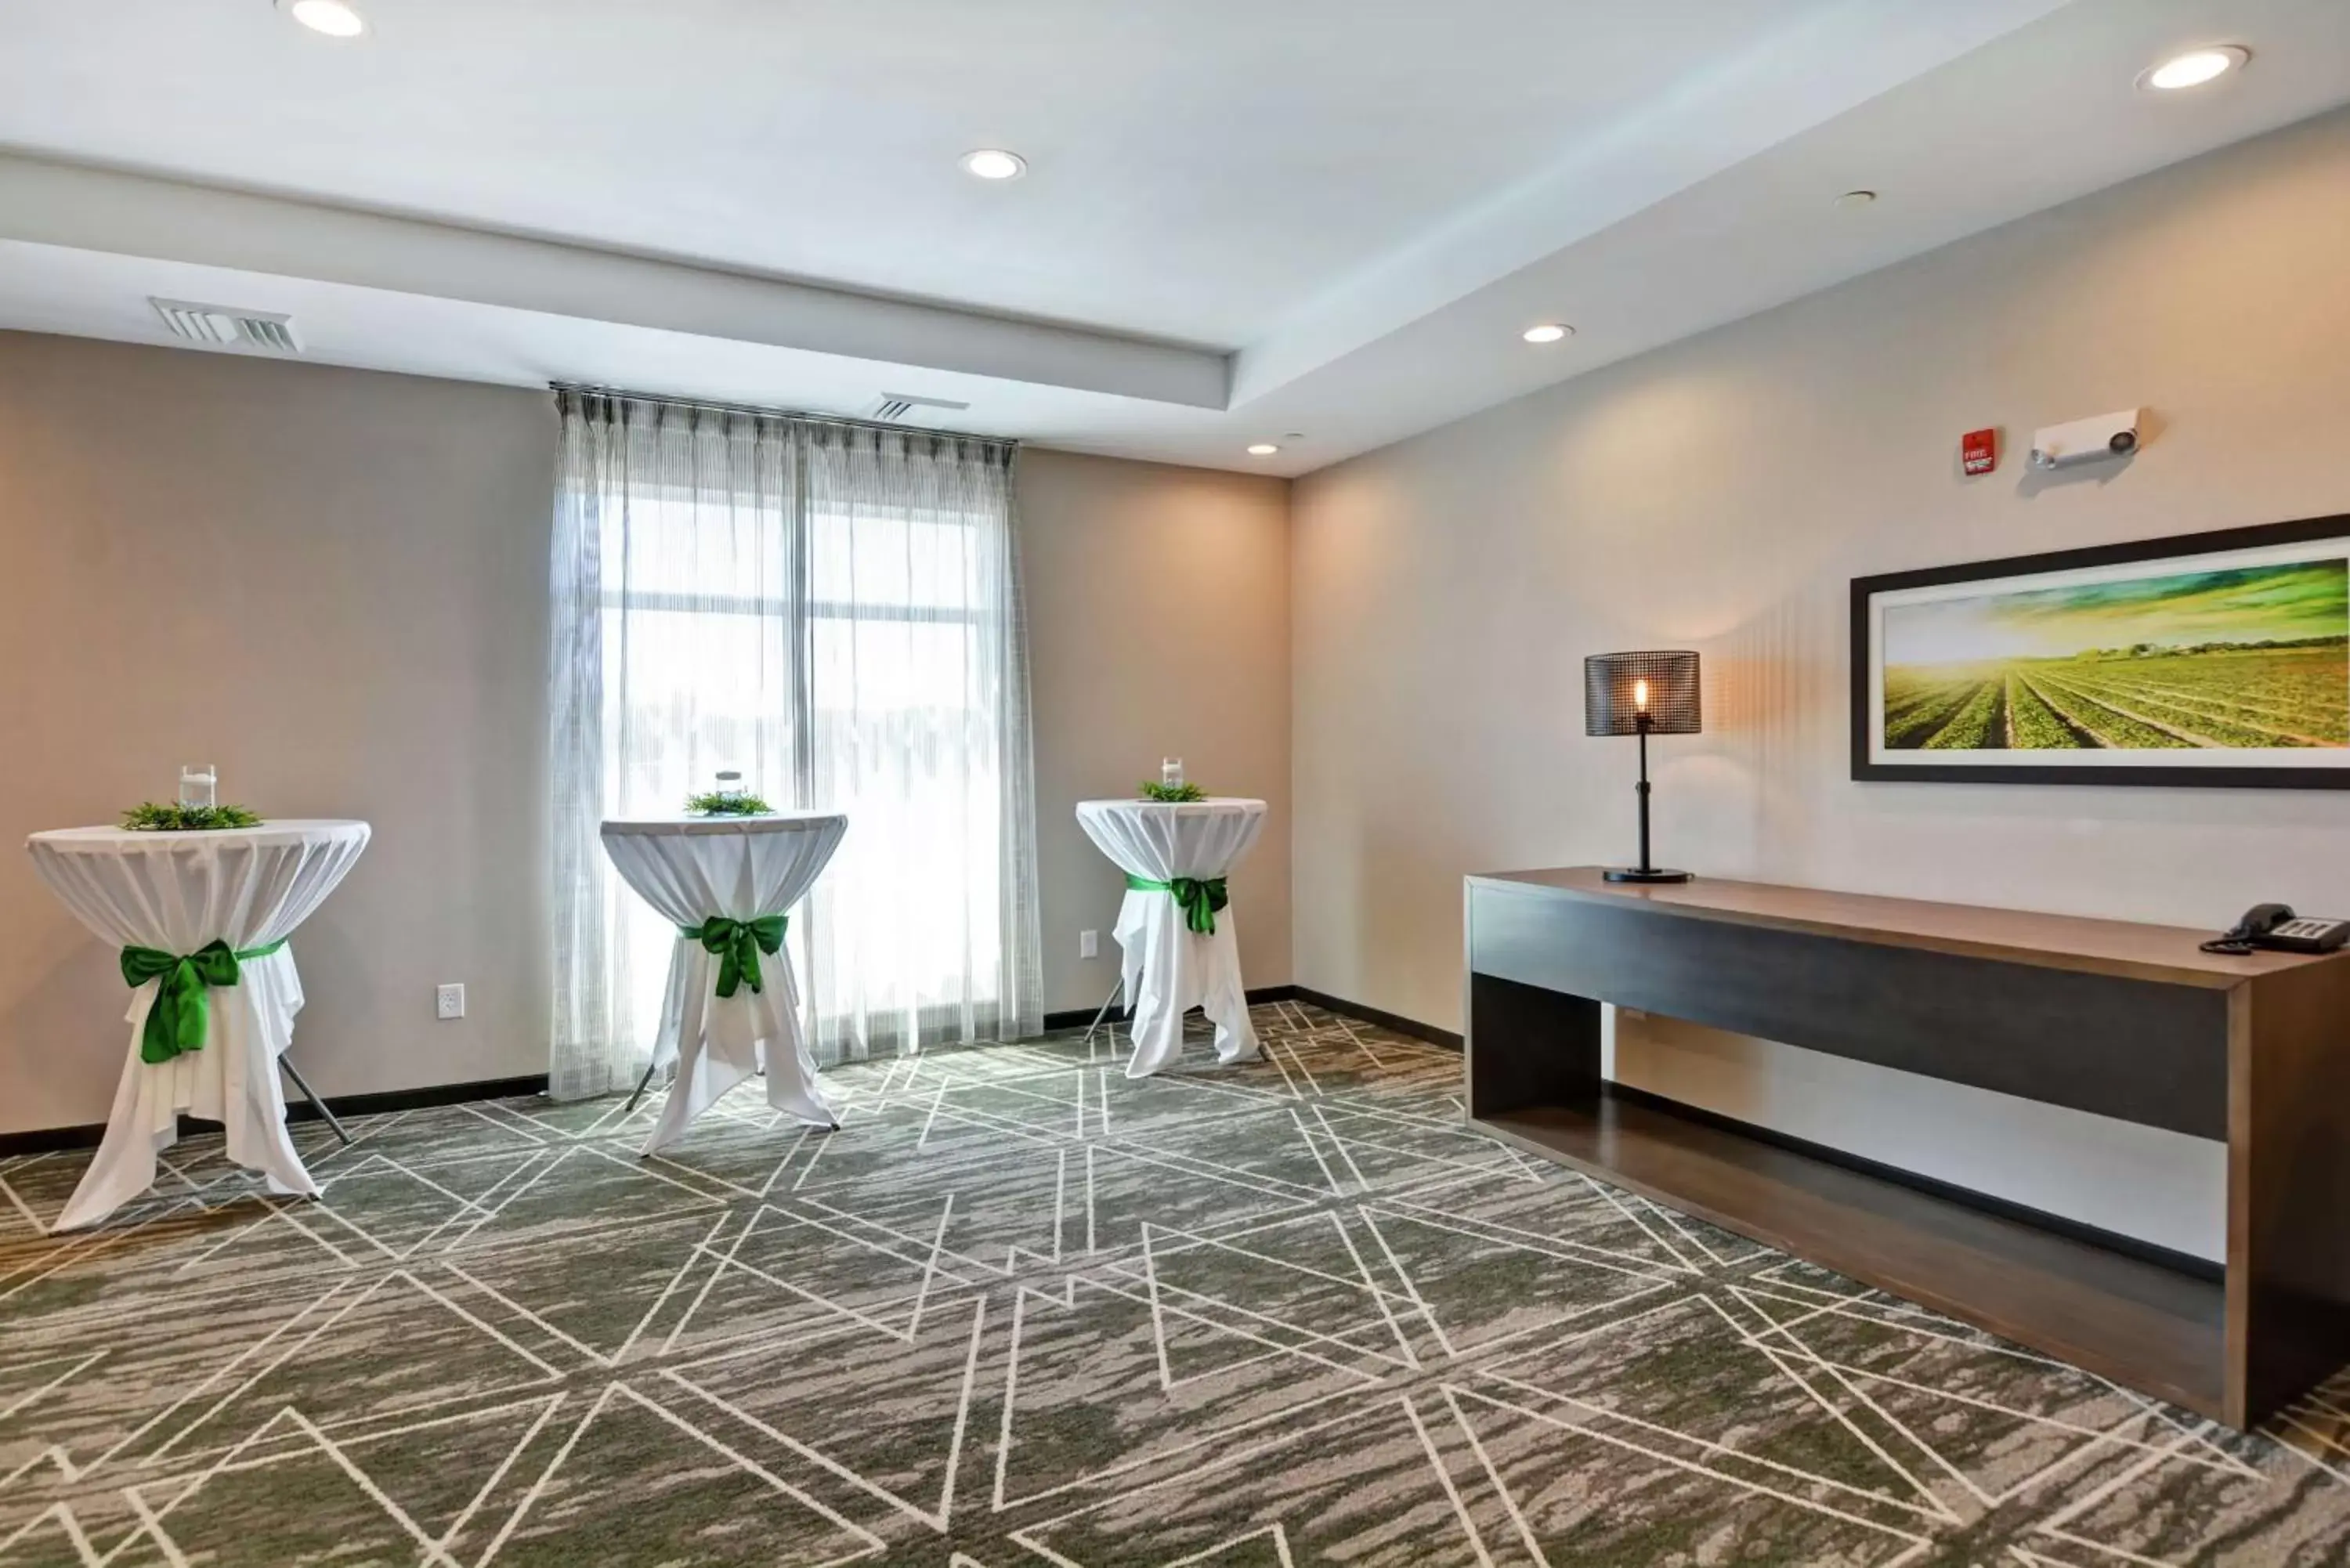 Meeting/conference room in Homewood Suites By Hilton Hadley Amherst